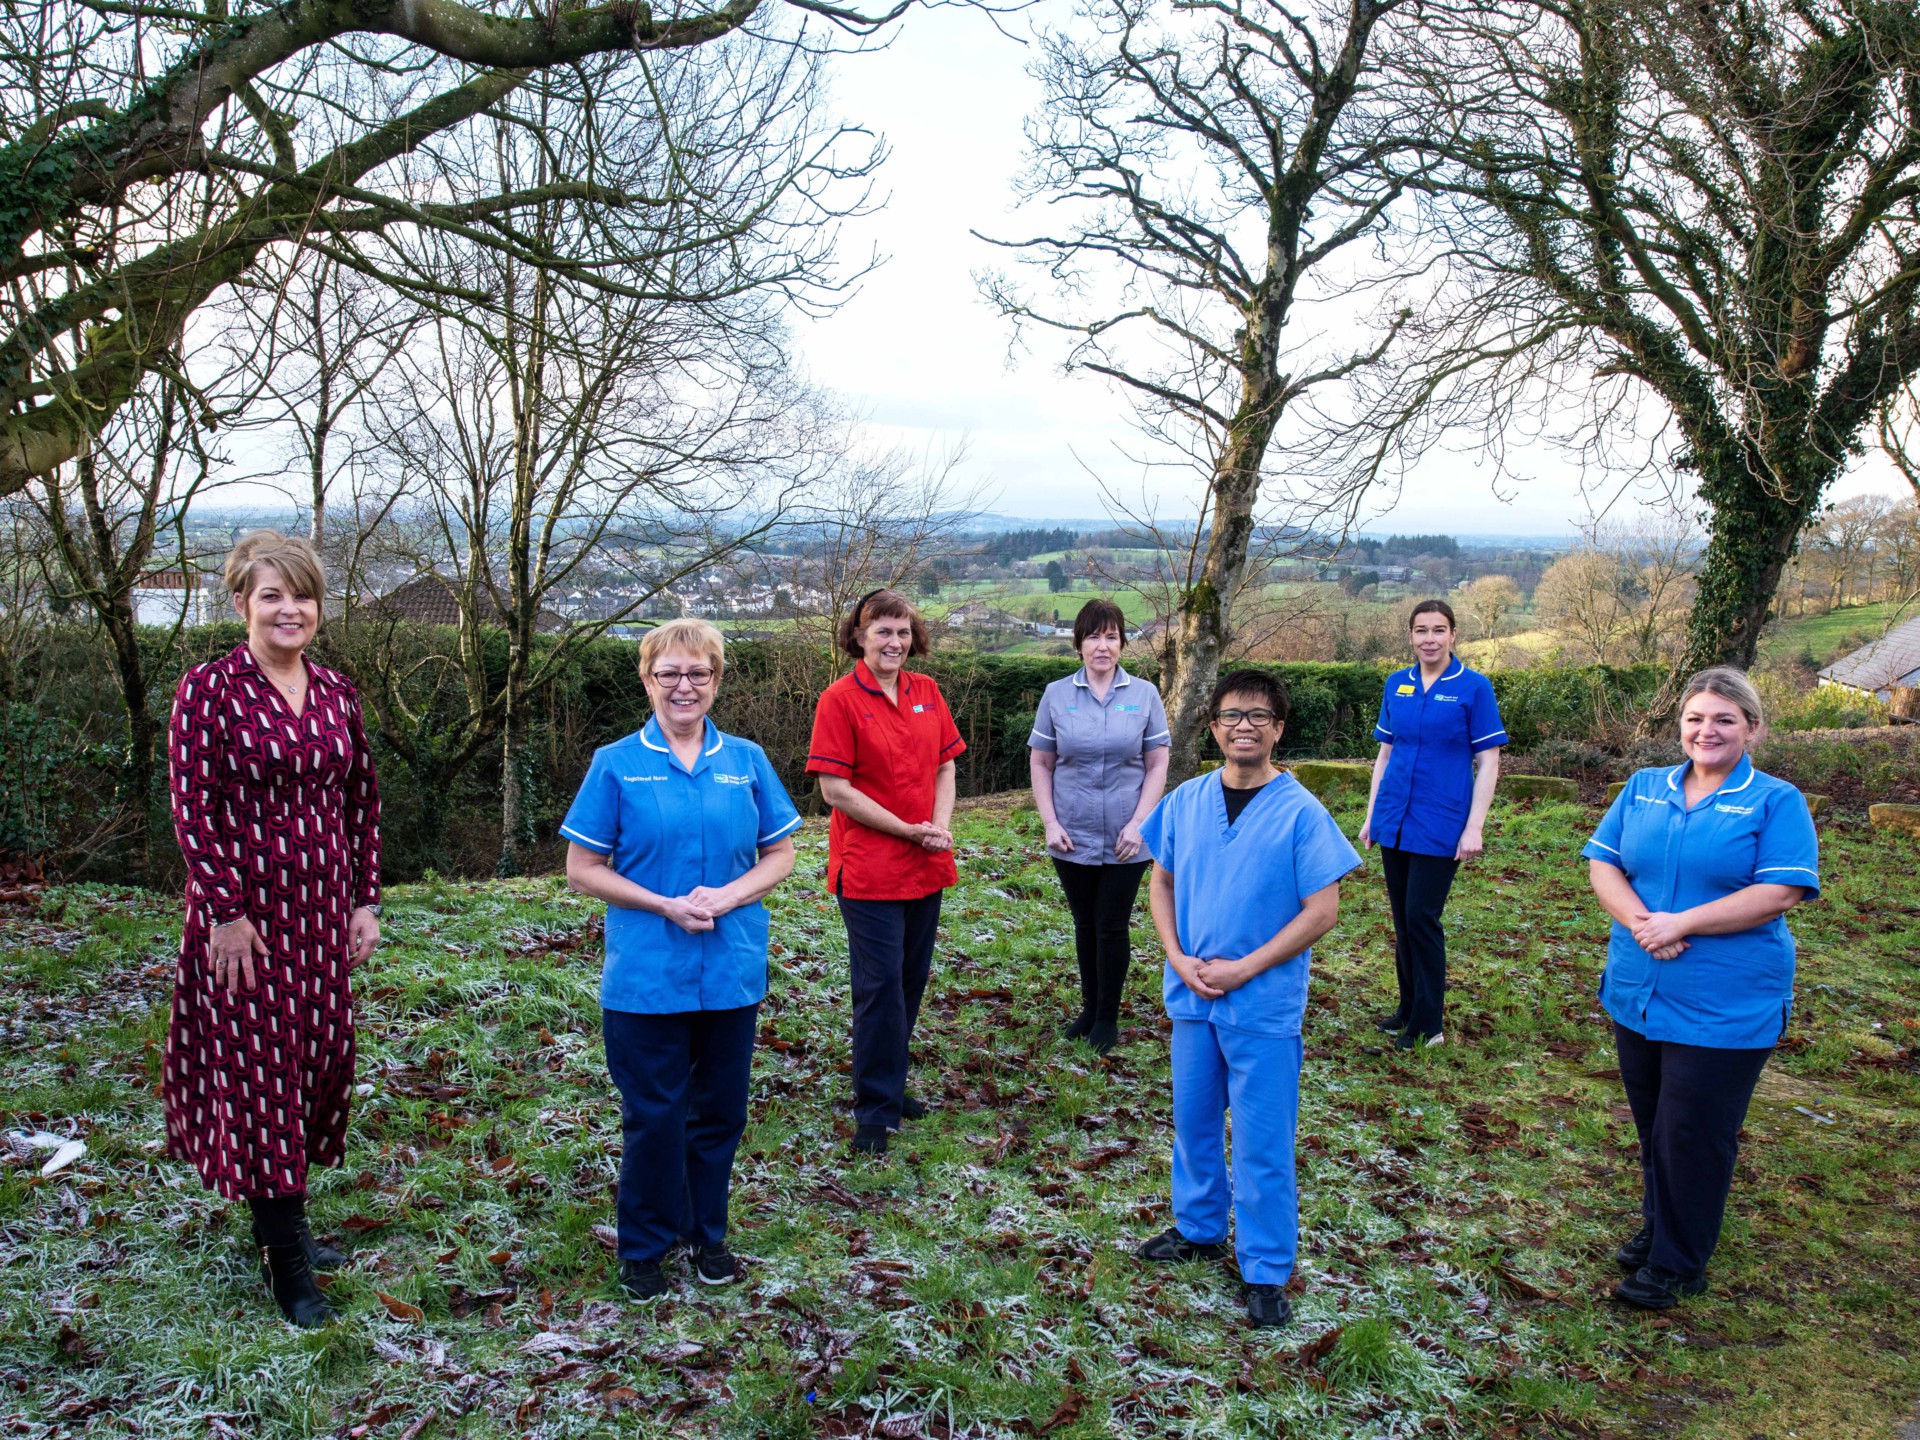 New Dungannon location for Day Clinical Centre